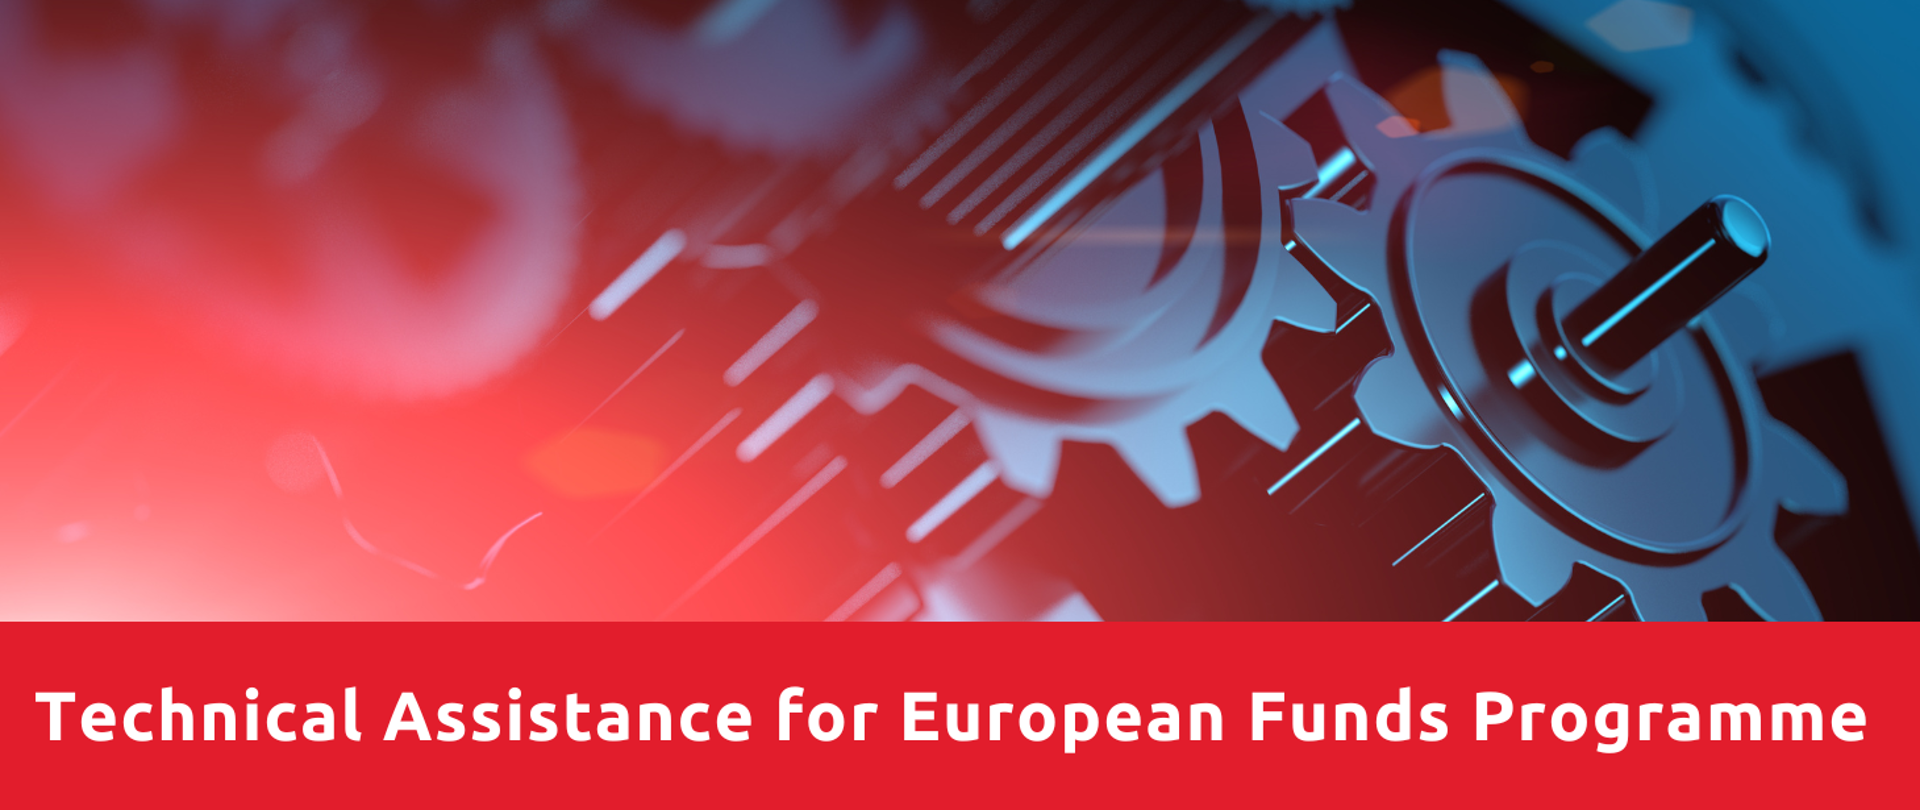 Technical Assistance for European Funds Programme approved by the European Commission 